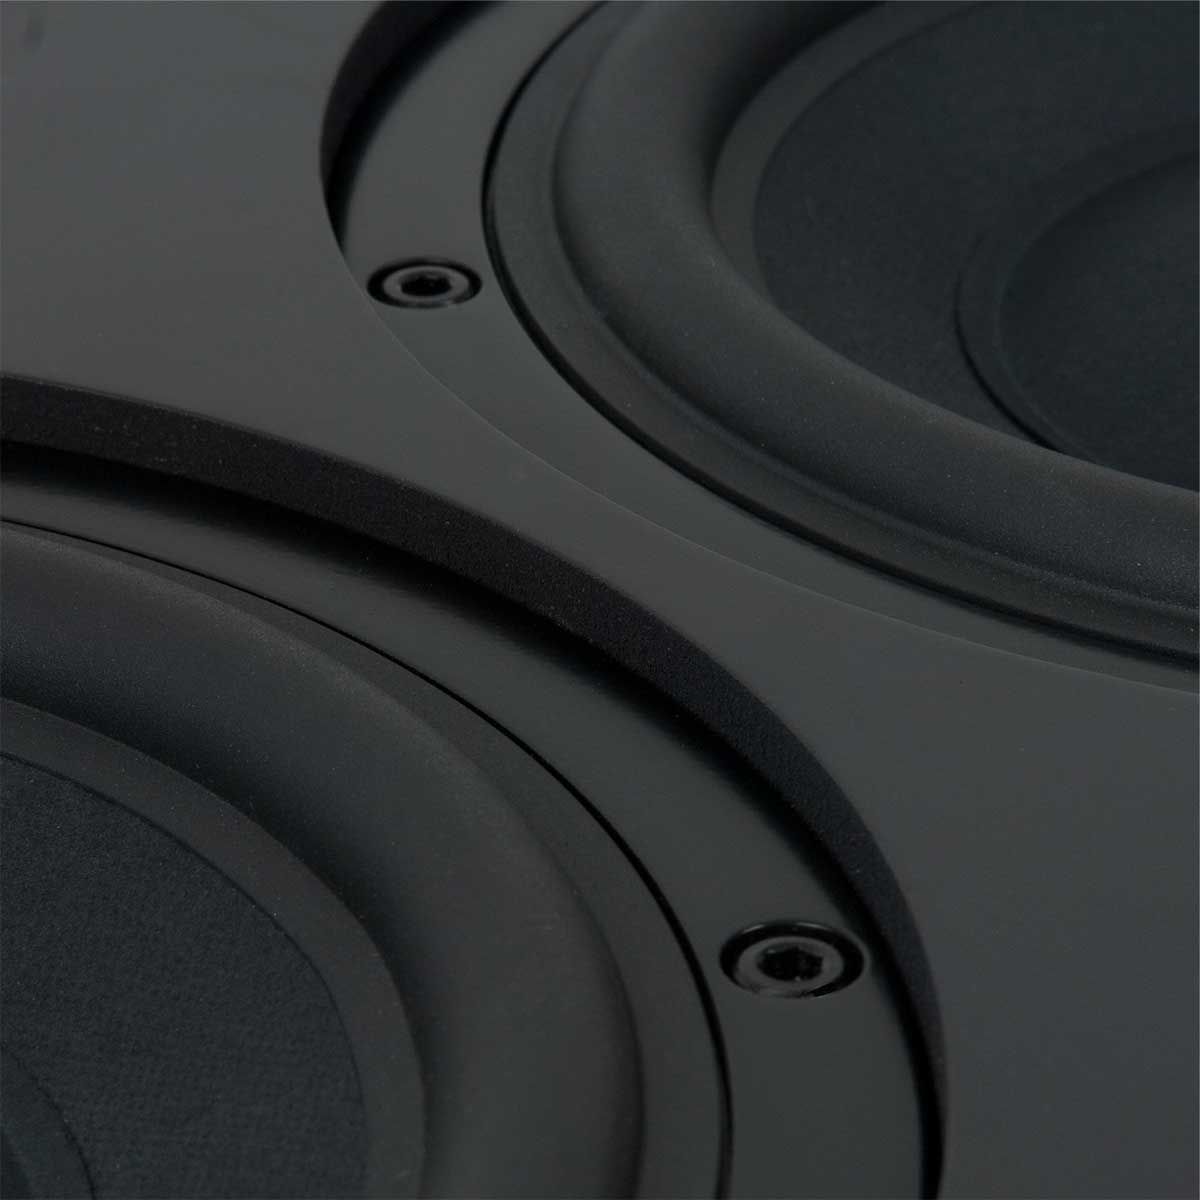 Bowers & Wilkins ISW-4 In-Wall Subwoofer, detailed view of drivers